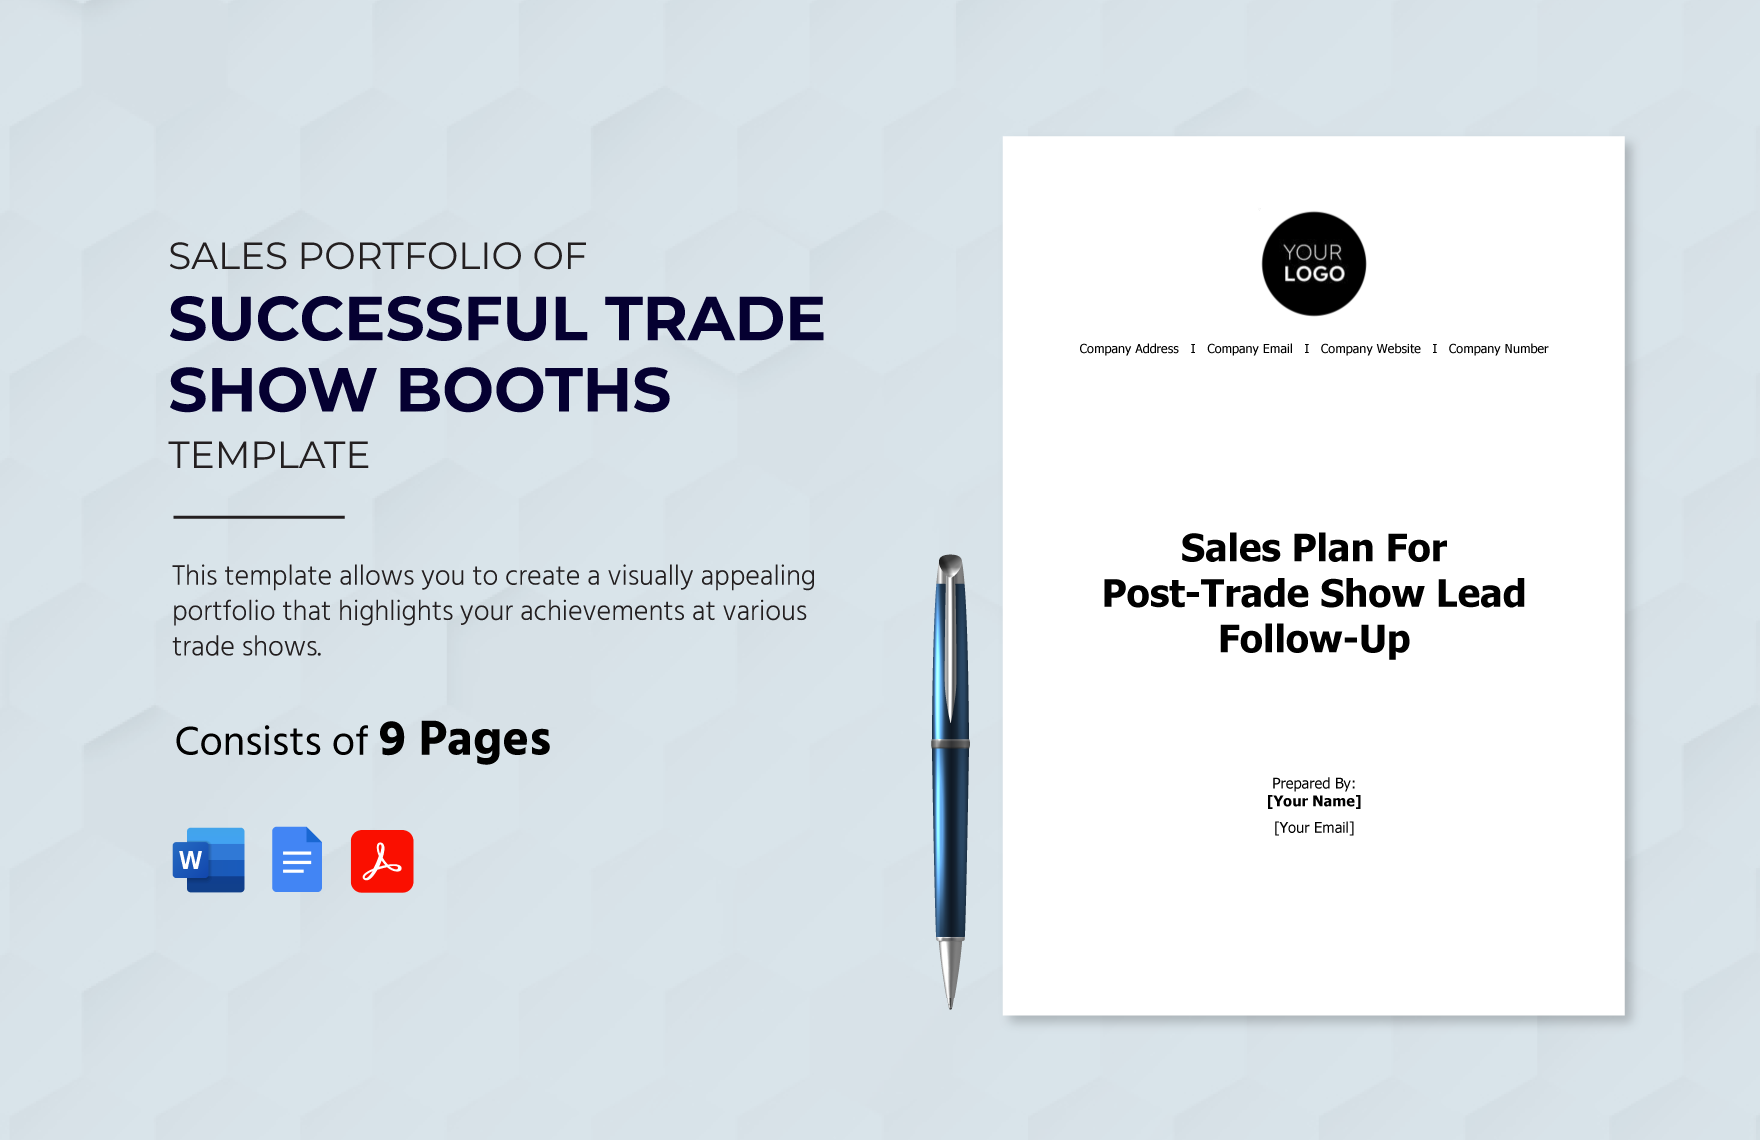 Sales Portfolio of Successful Trade Show Booths Template